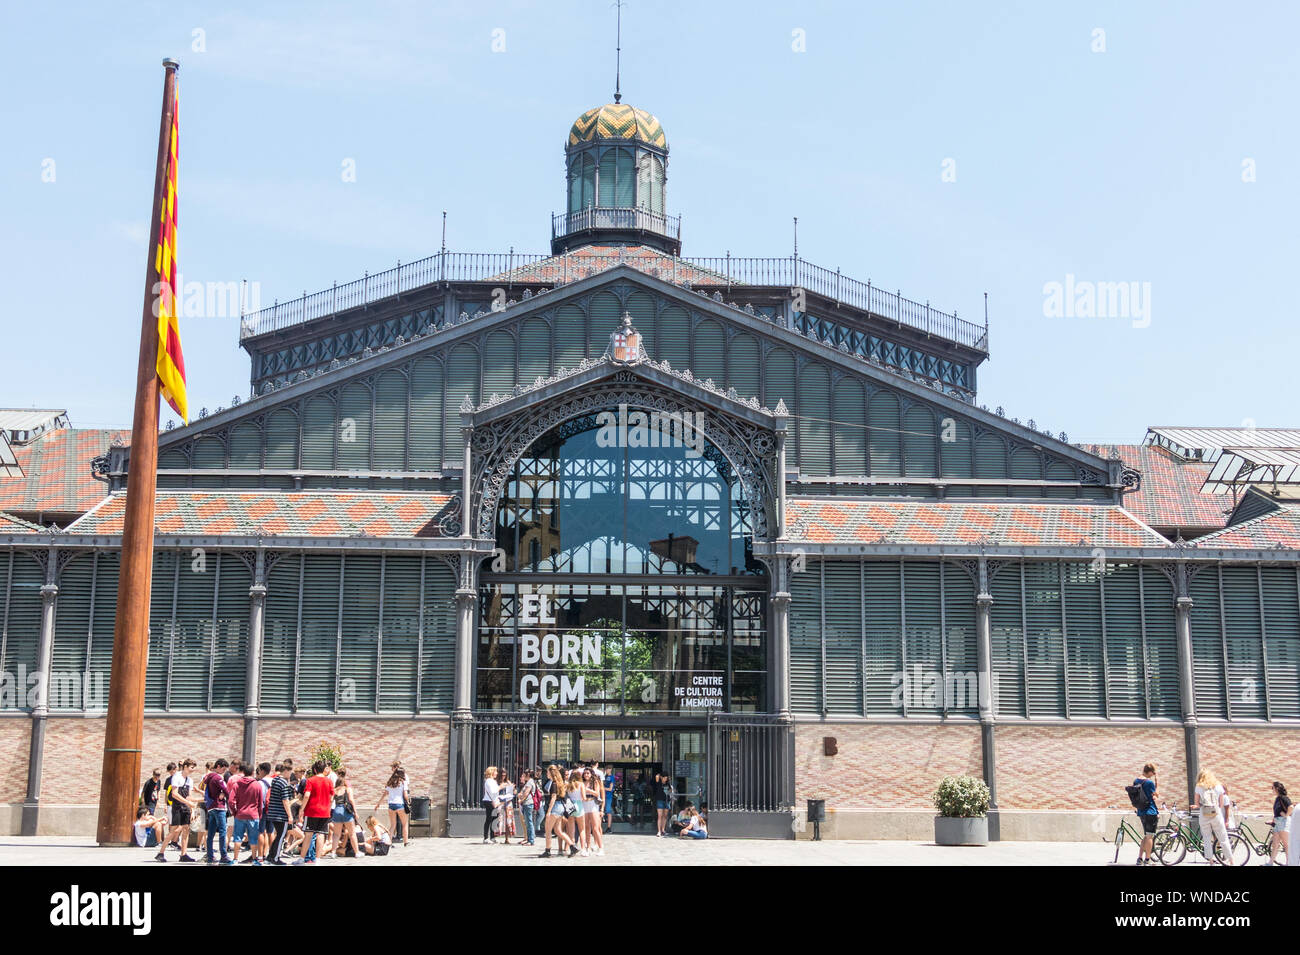 BARCELONA - JUNE 20, 2019: Tourits from the facade of Born market. It is an example of iron architecture, a movement within the modernist. Born distri Stock Photo